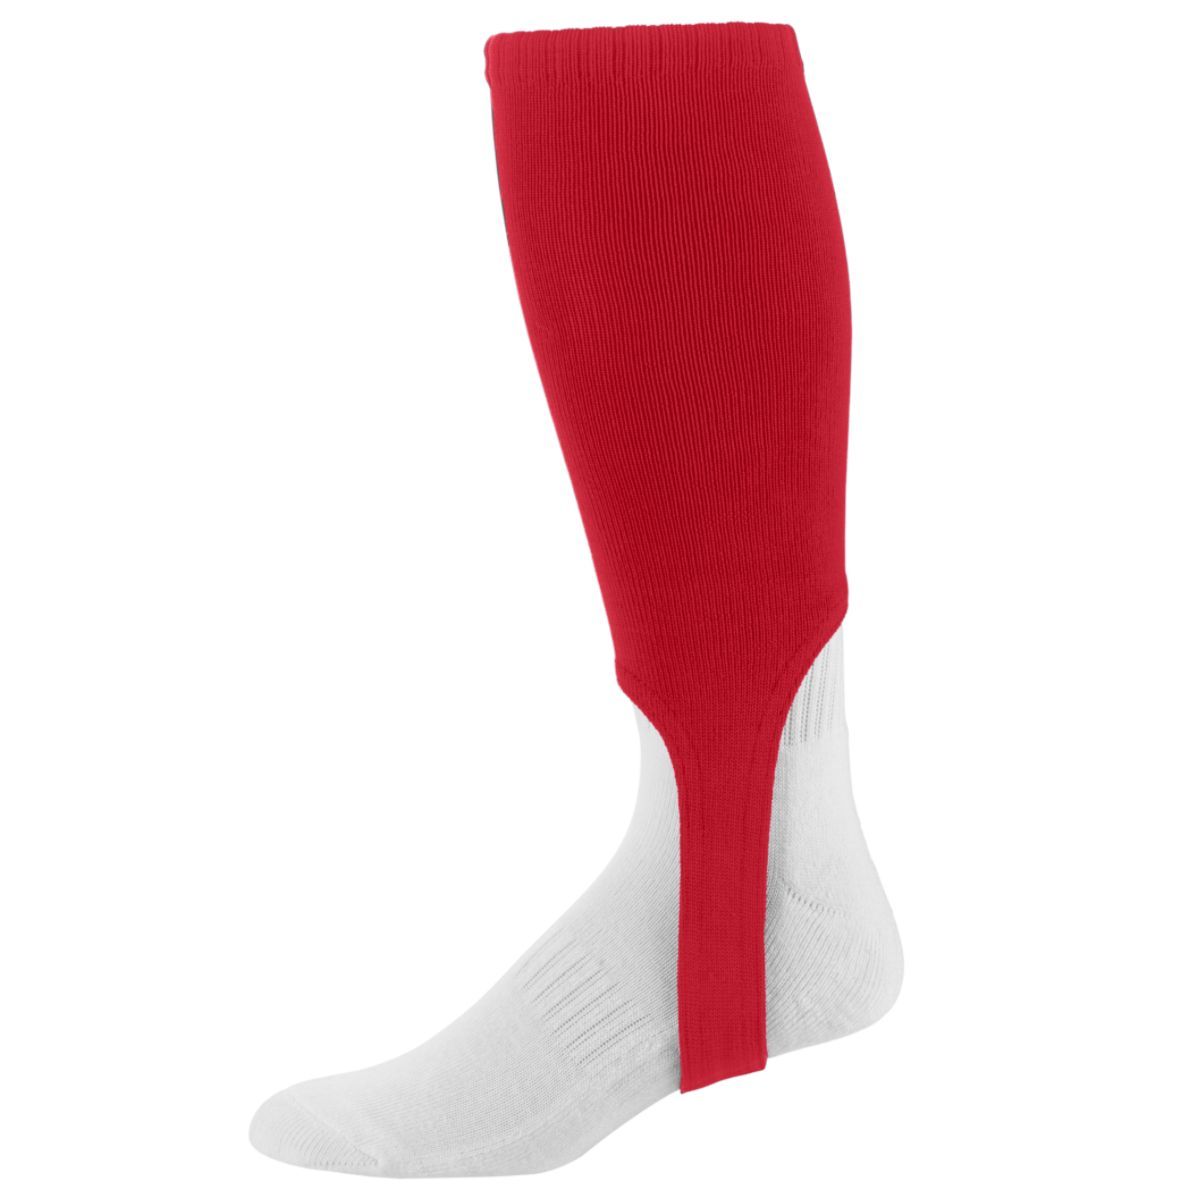 Augusta Sportswear Stirrup Sock in Red  -Part of the Accessories, Augusta-Products, Accessories-Socks, Baseball, All-Sports, All-Sports-1 product lines at KanaleyCreations.com